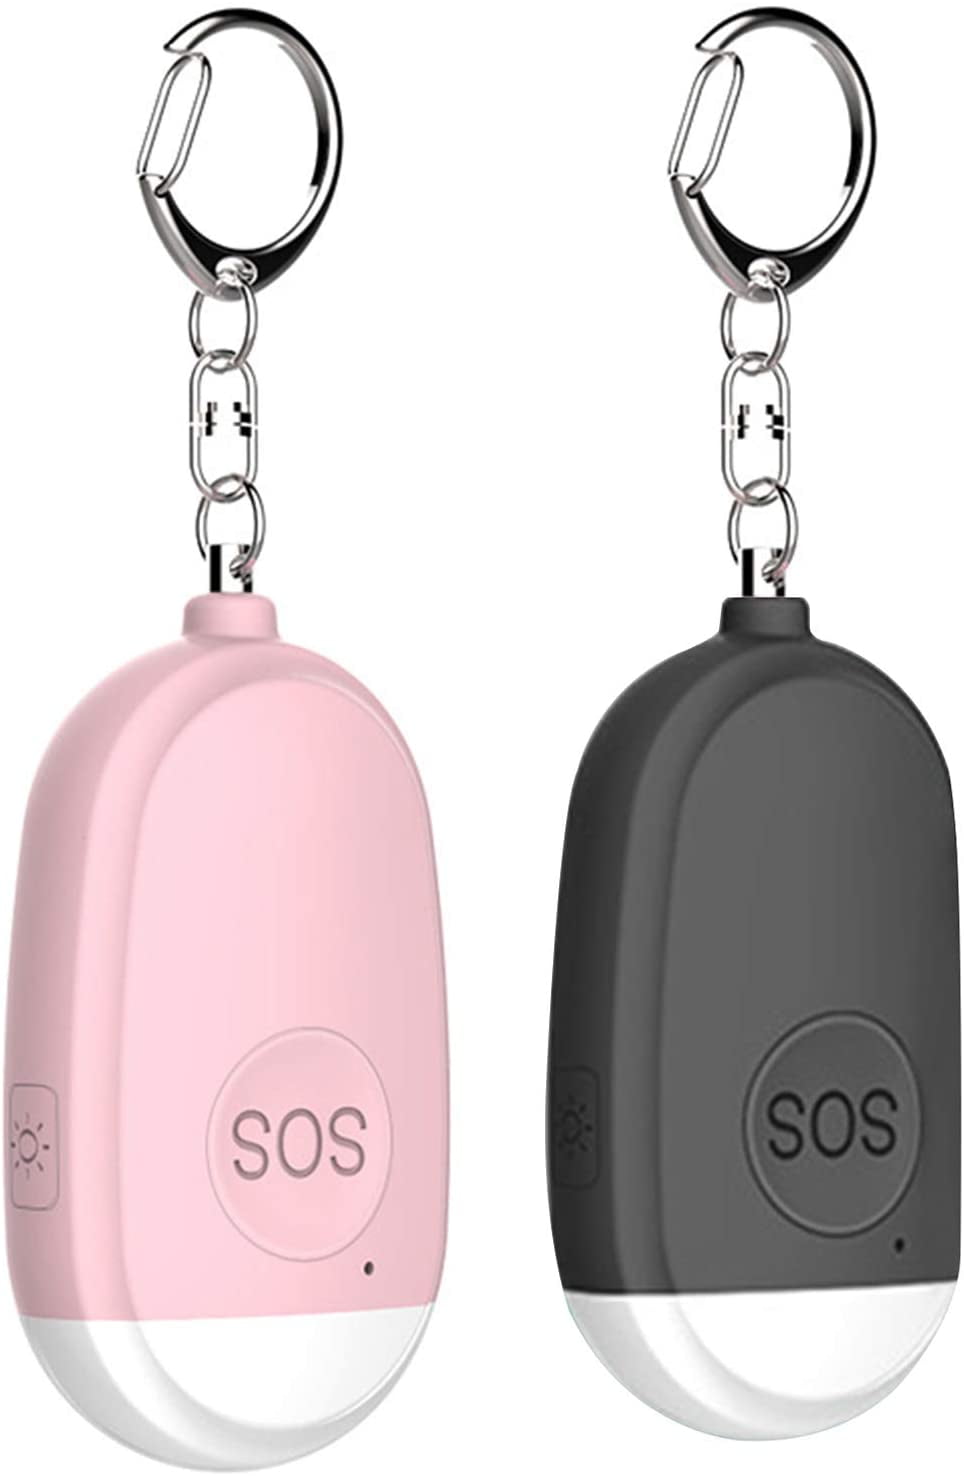 Security Personal Protection Devices for Women Girls Kids Elderly Safesound Personal Alarm Siren Song 2 Pack 130dB Self Defense Alarm Keychain Emergency LED Flashlight with USB Rechargerable 